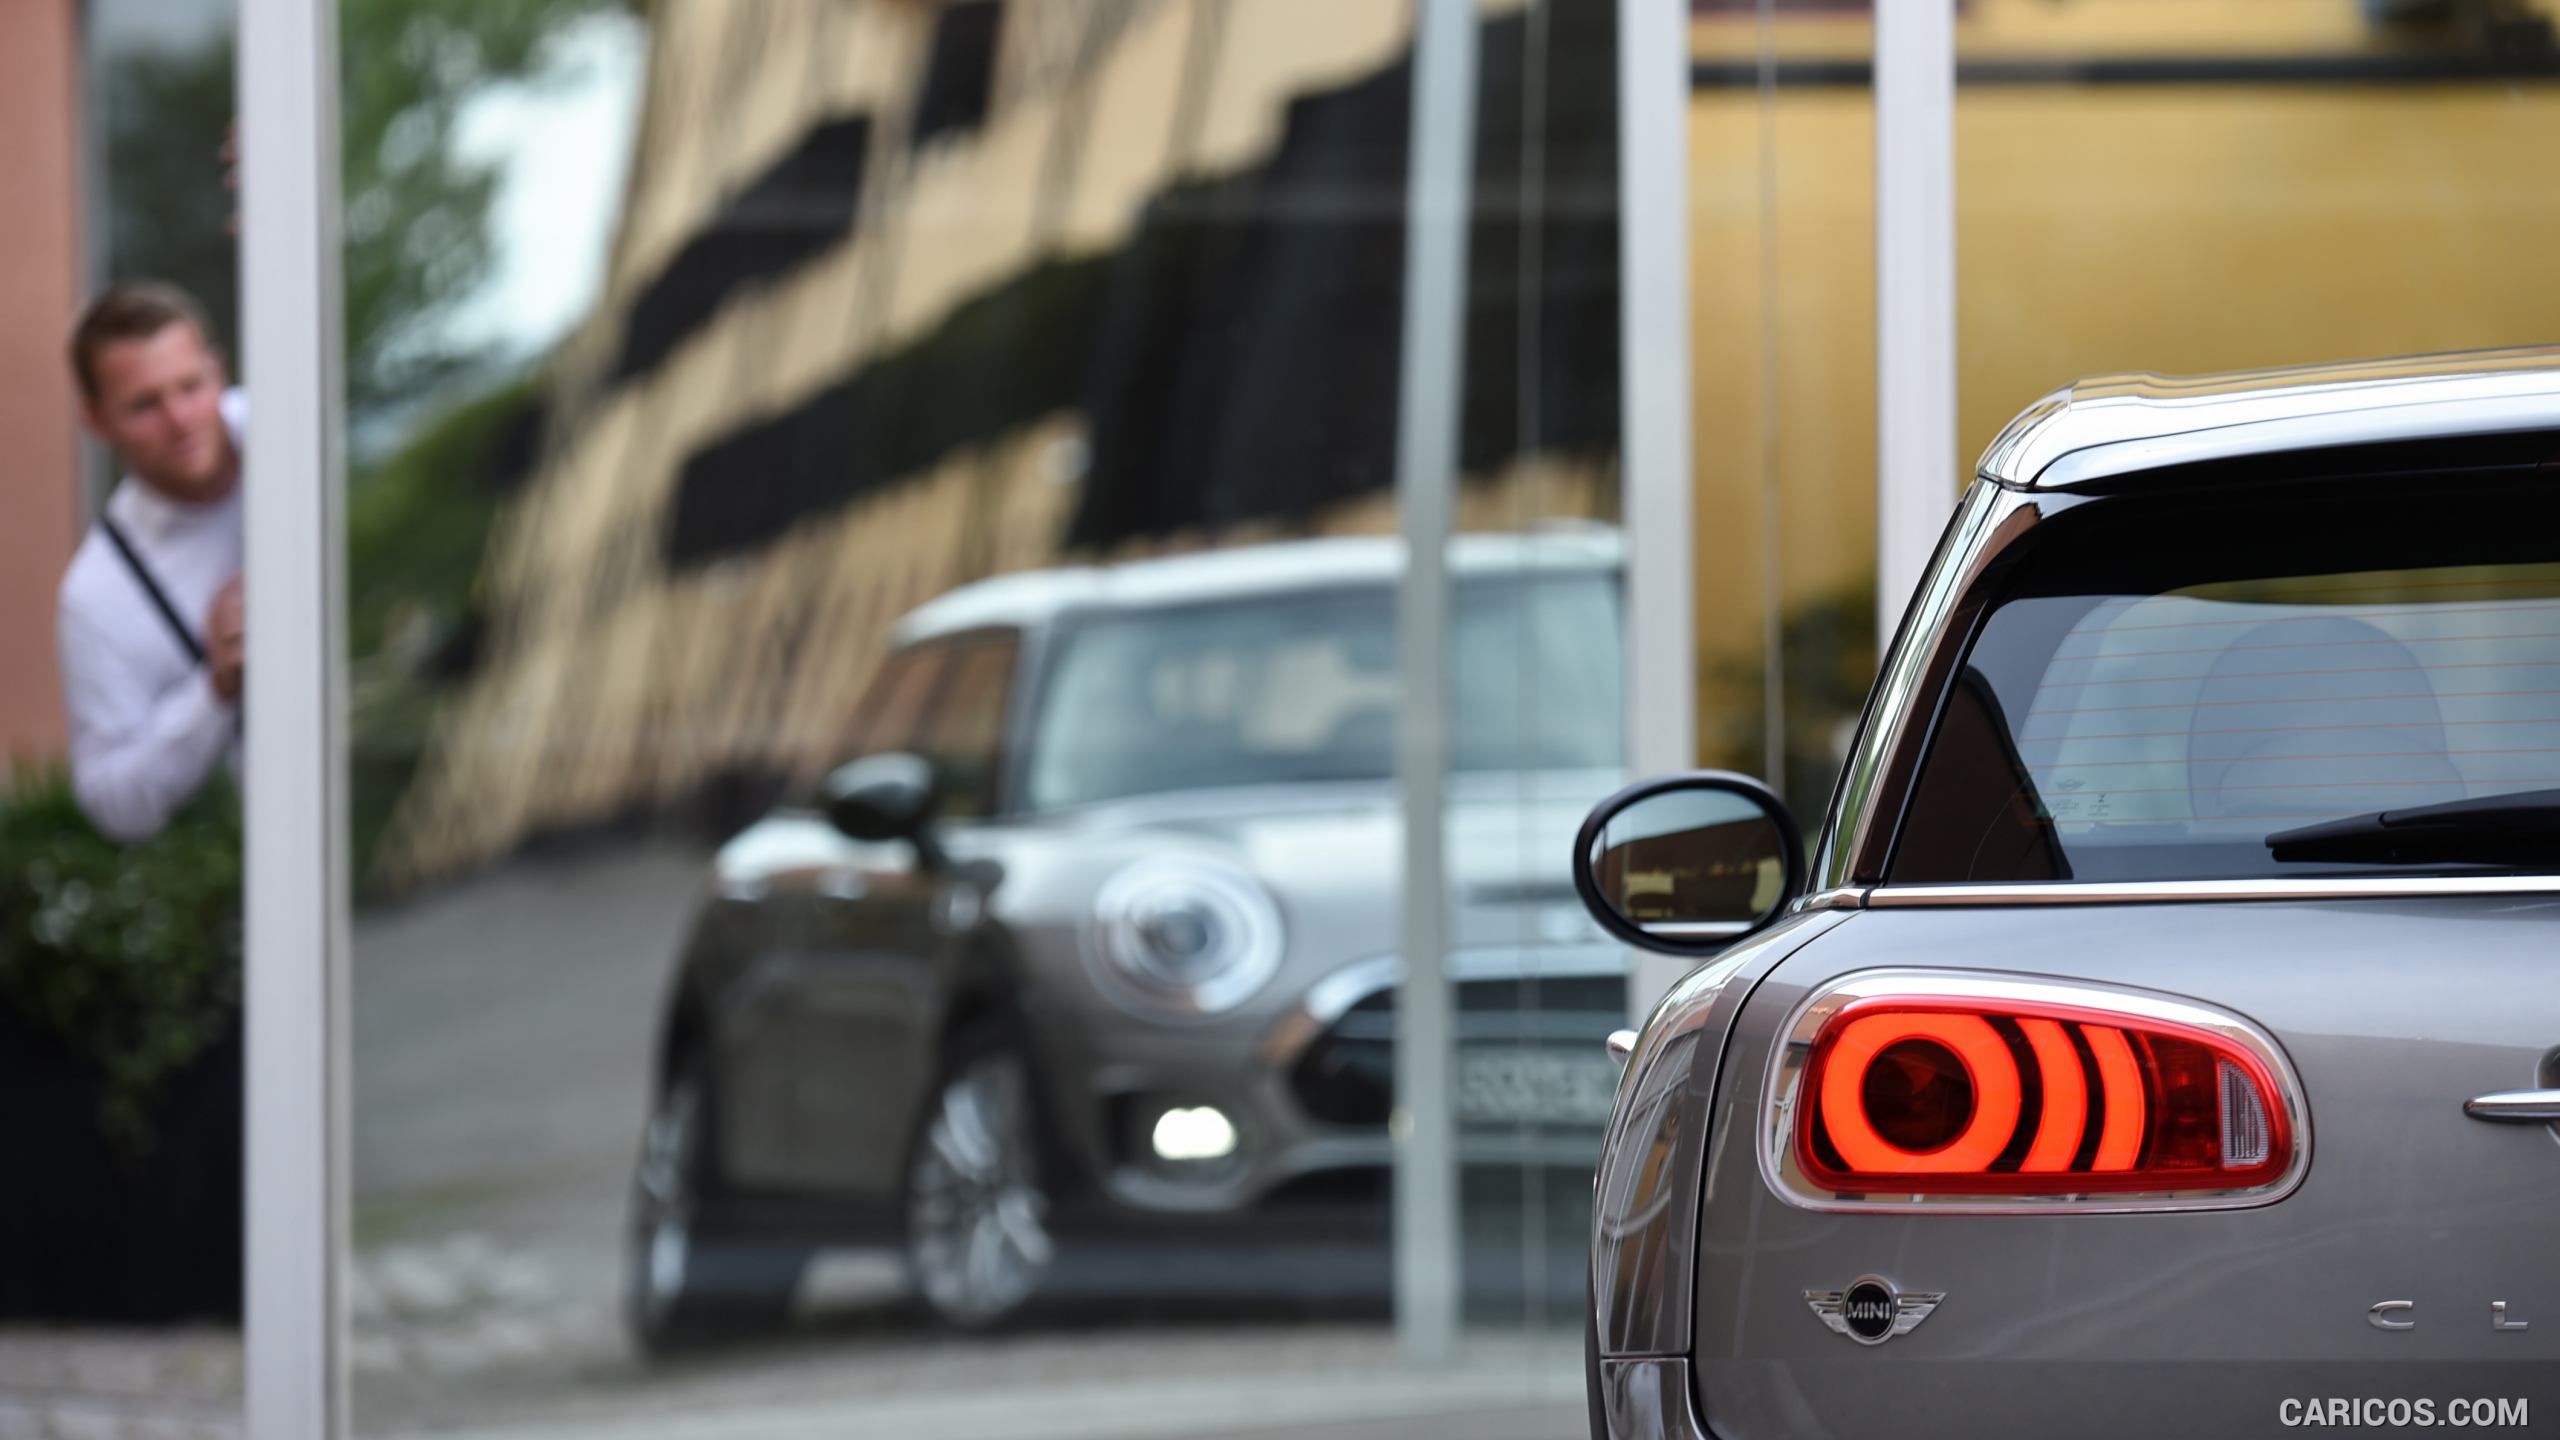 2016 MINI Cooper S Clubman in Metallic Melting Silver - Tail Light, #179 of 380